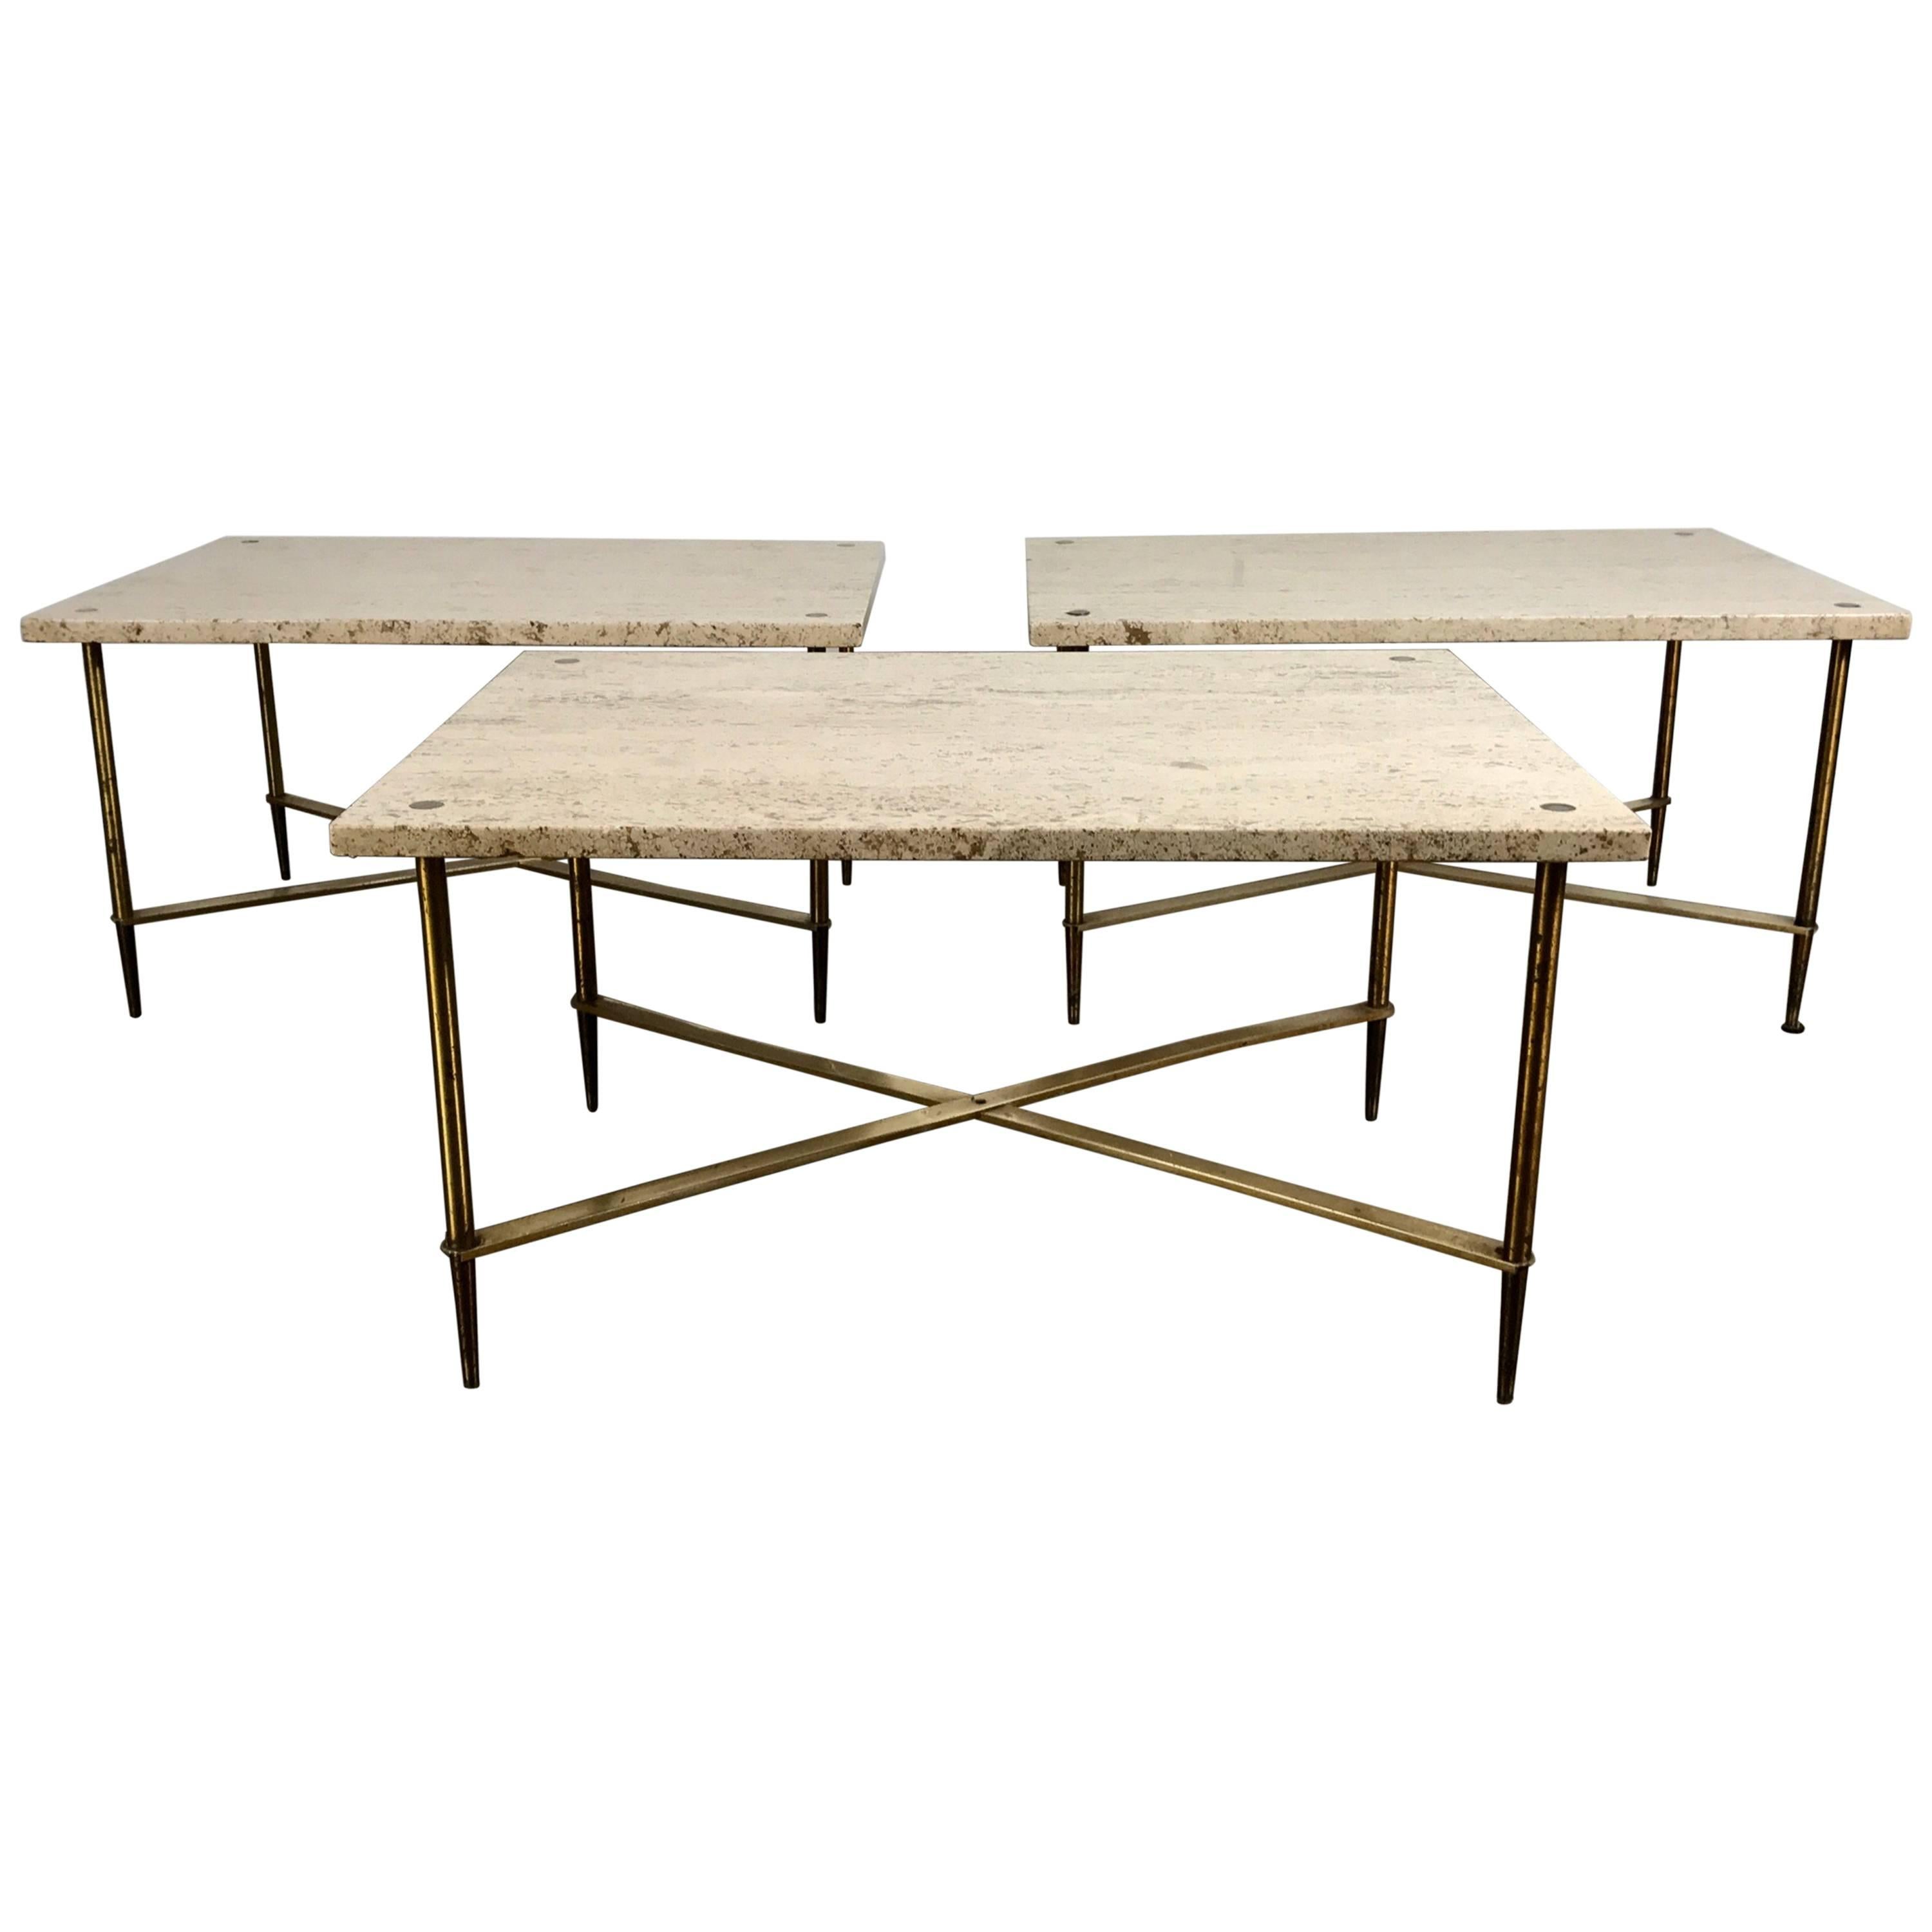 Stunning Travertine and Brass Tables made in Italy after Gio Ponti